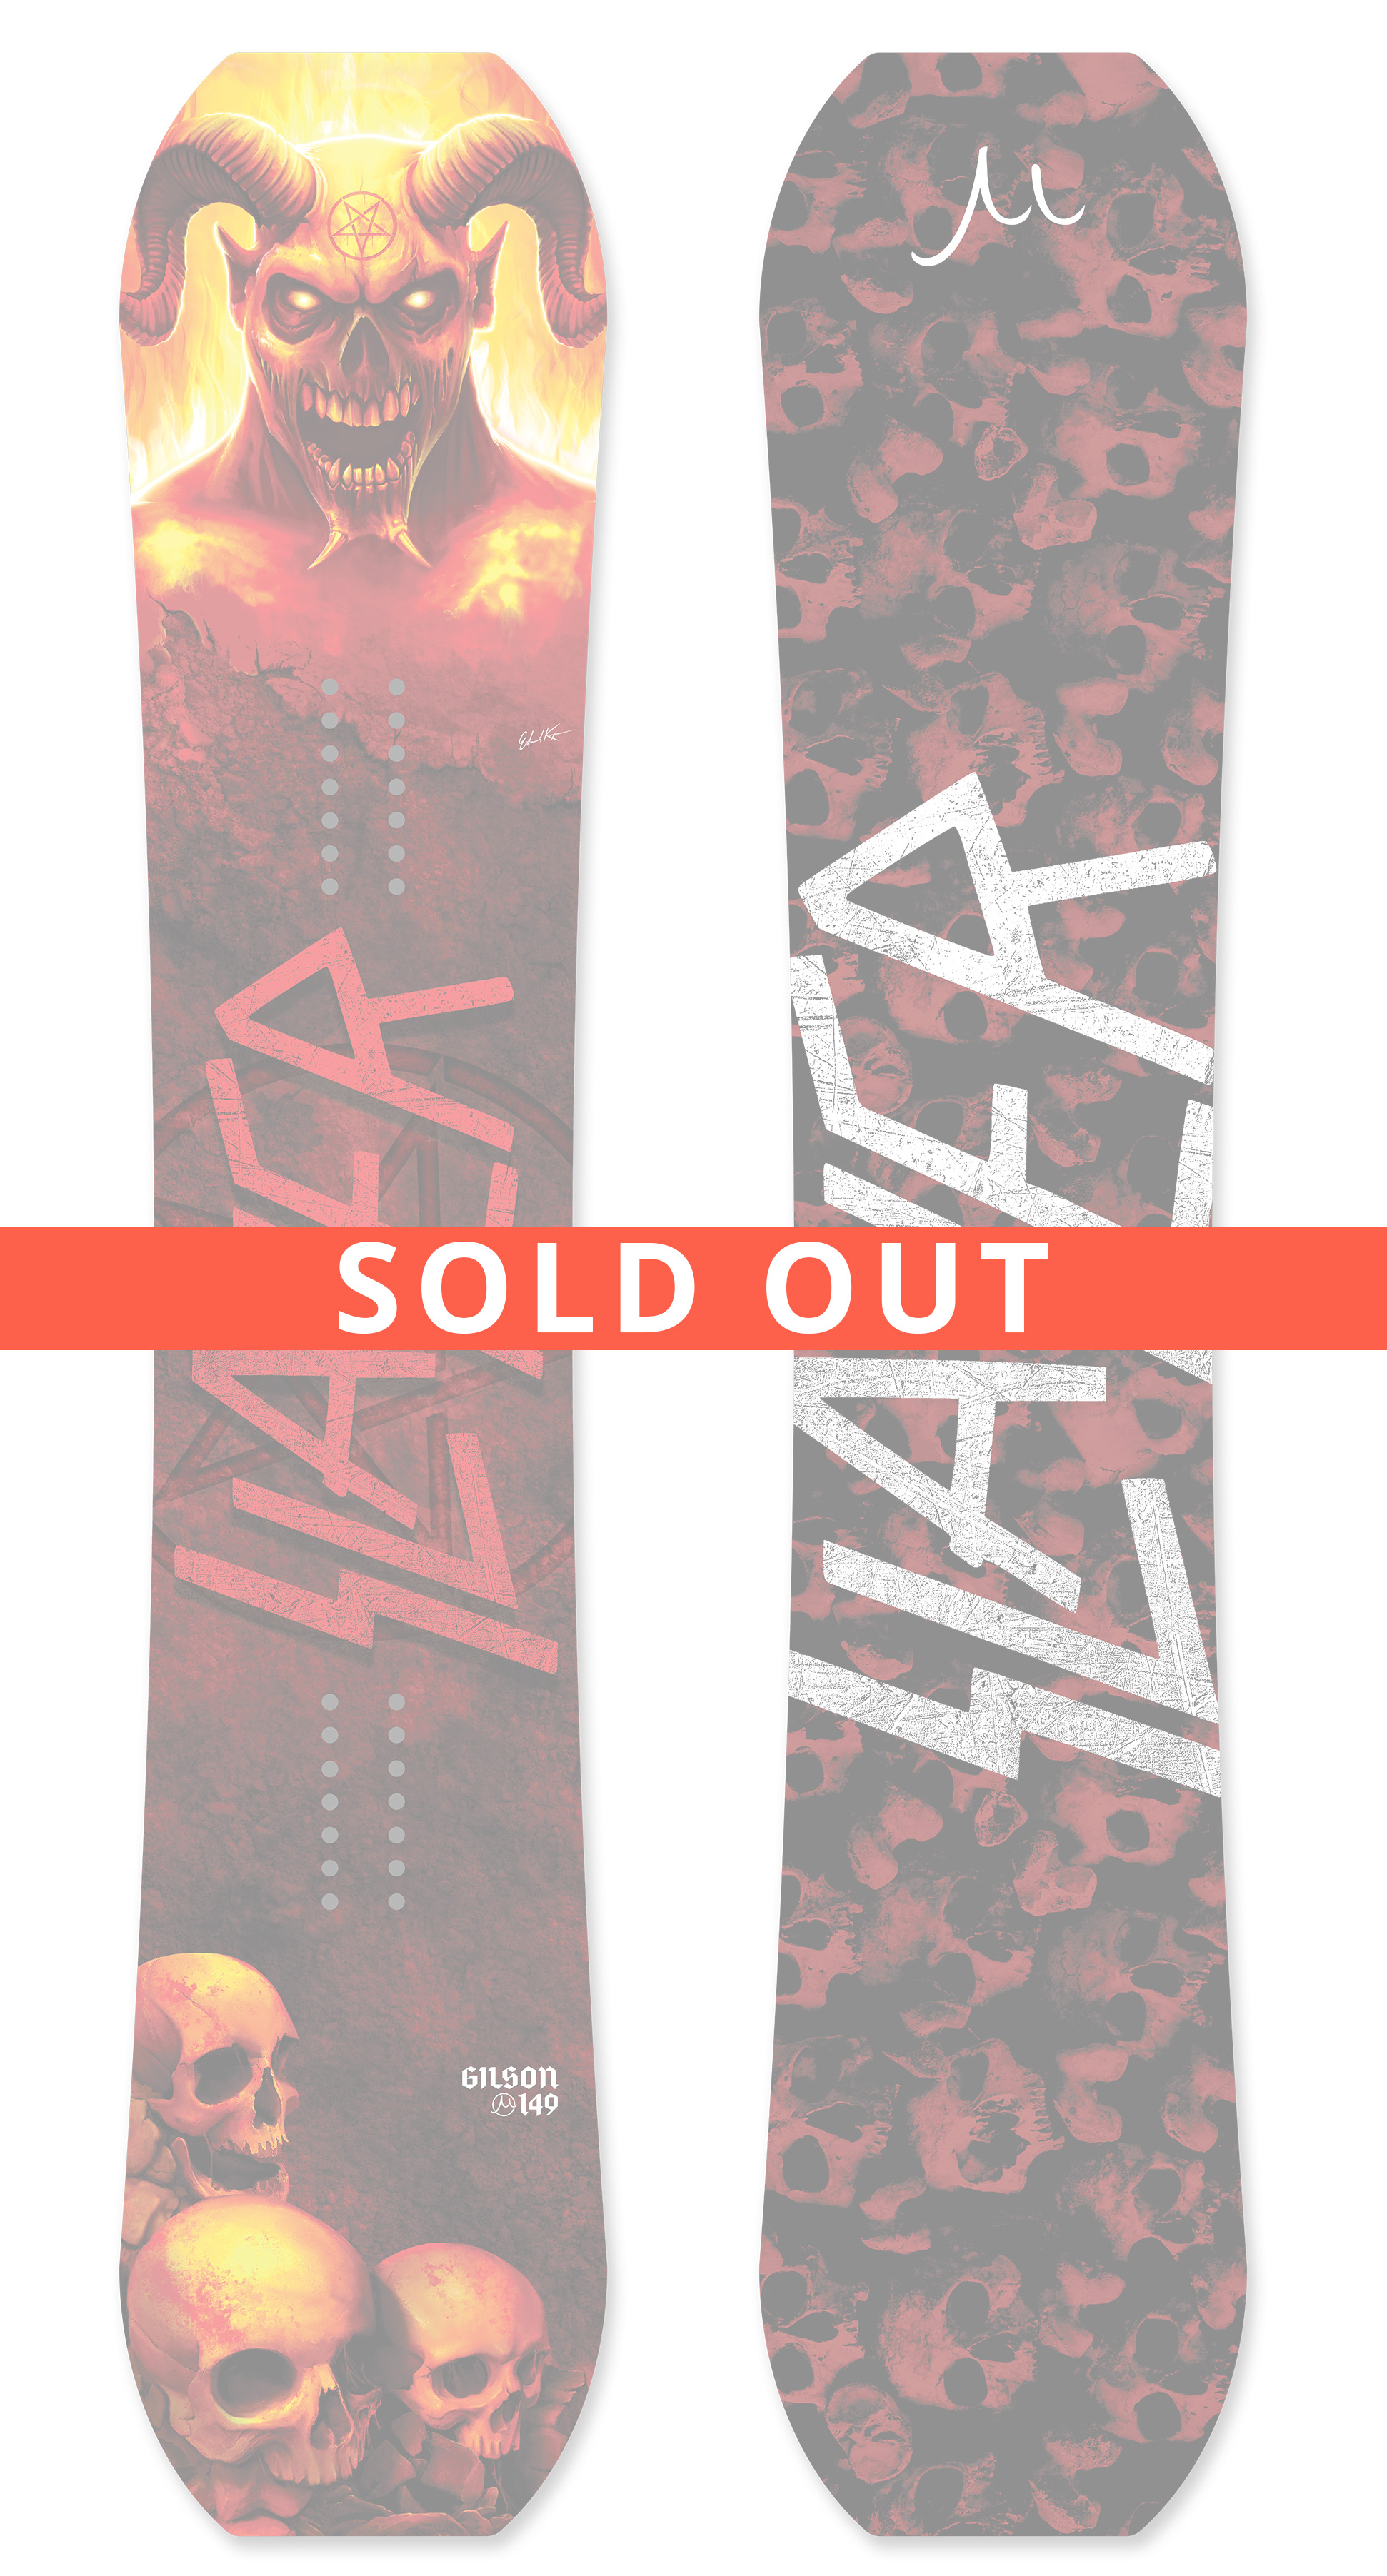 Slayer undead sold out large